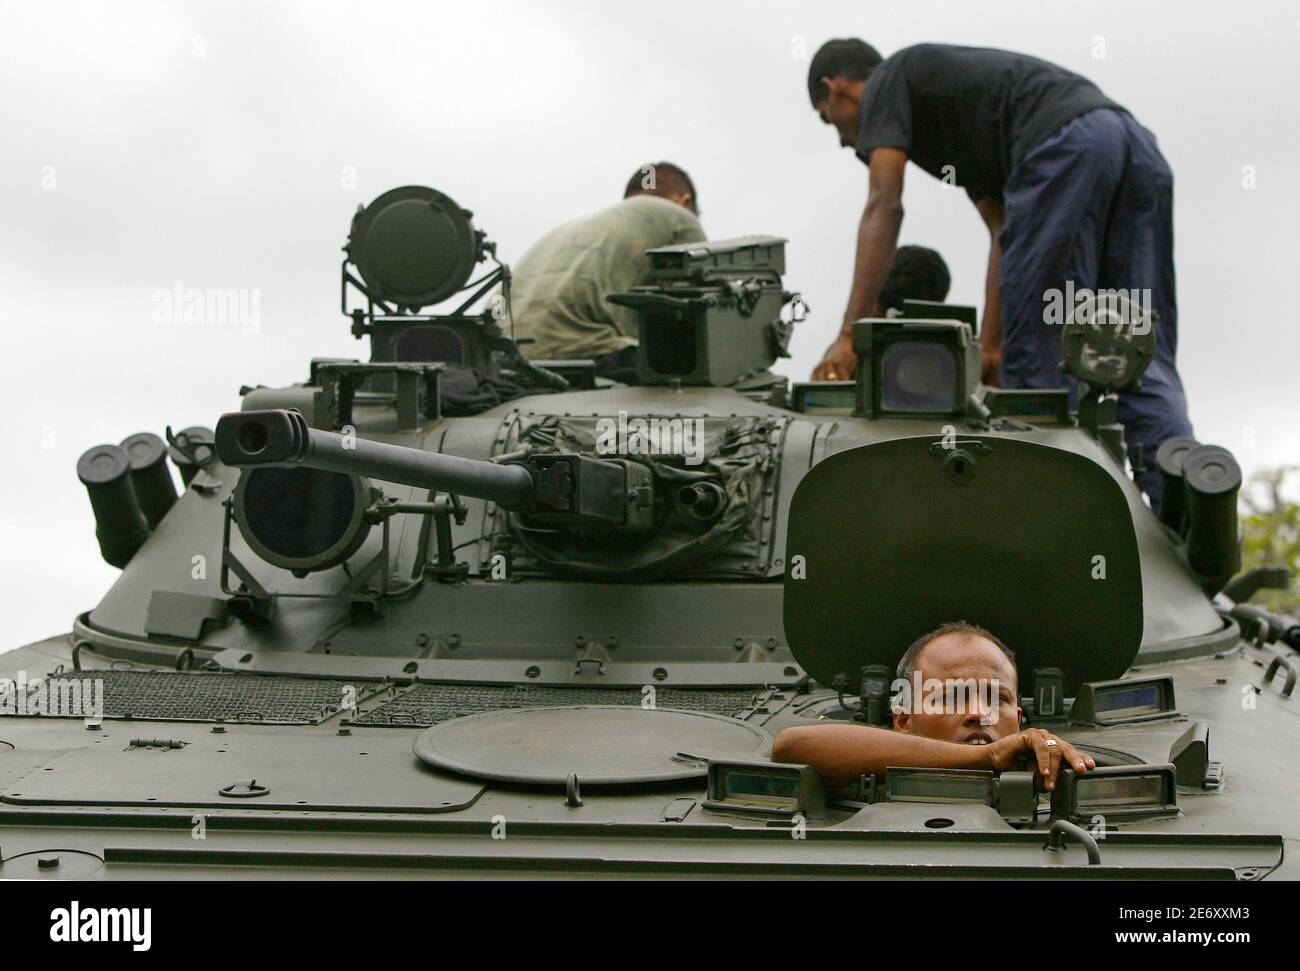 Army engineers prepare a tank for display to the public in the lead up to the Army's 60th anniversary in Colombo, September 29, 2009. The Sri Lankan Army will celebrate its 60th anniversary and its defeat of the Liberation Tigers of Tamil Eelam (LTTE) throughout the month of October with military parades, weapons exhibitions, and a show of military force through demonstrations. REUTERS/Andrew Caballero-Reynolds  (SRI LANKA CONFLICT ODDLY) Stock Photo